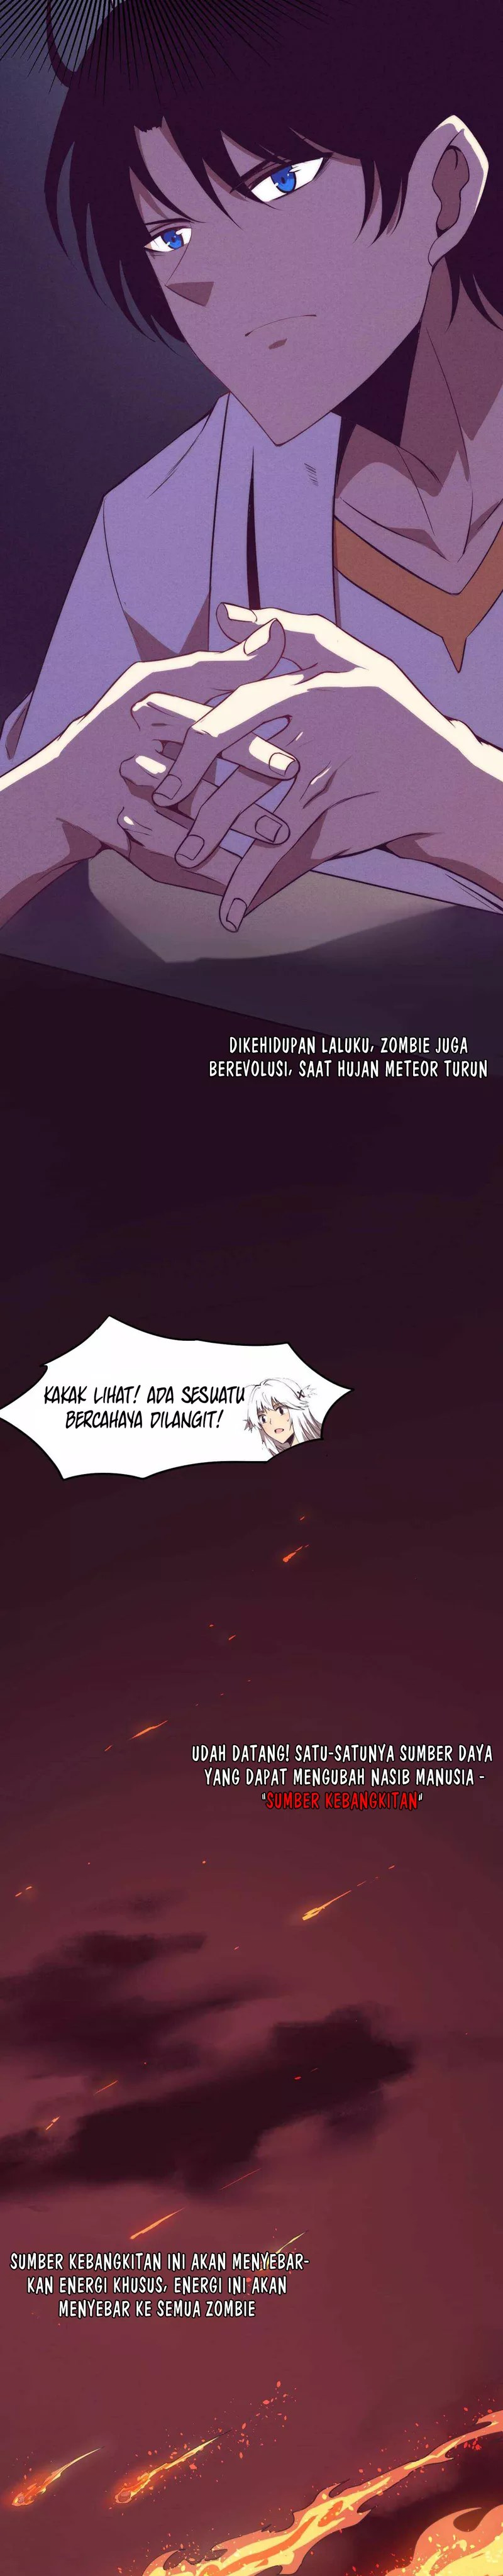 Evolution Frenzy Chapter 06 bahasa indoensia